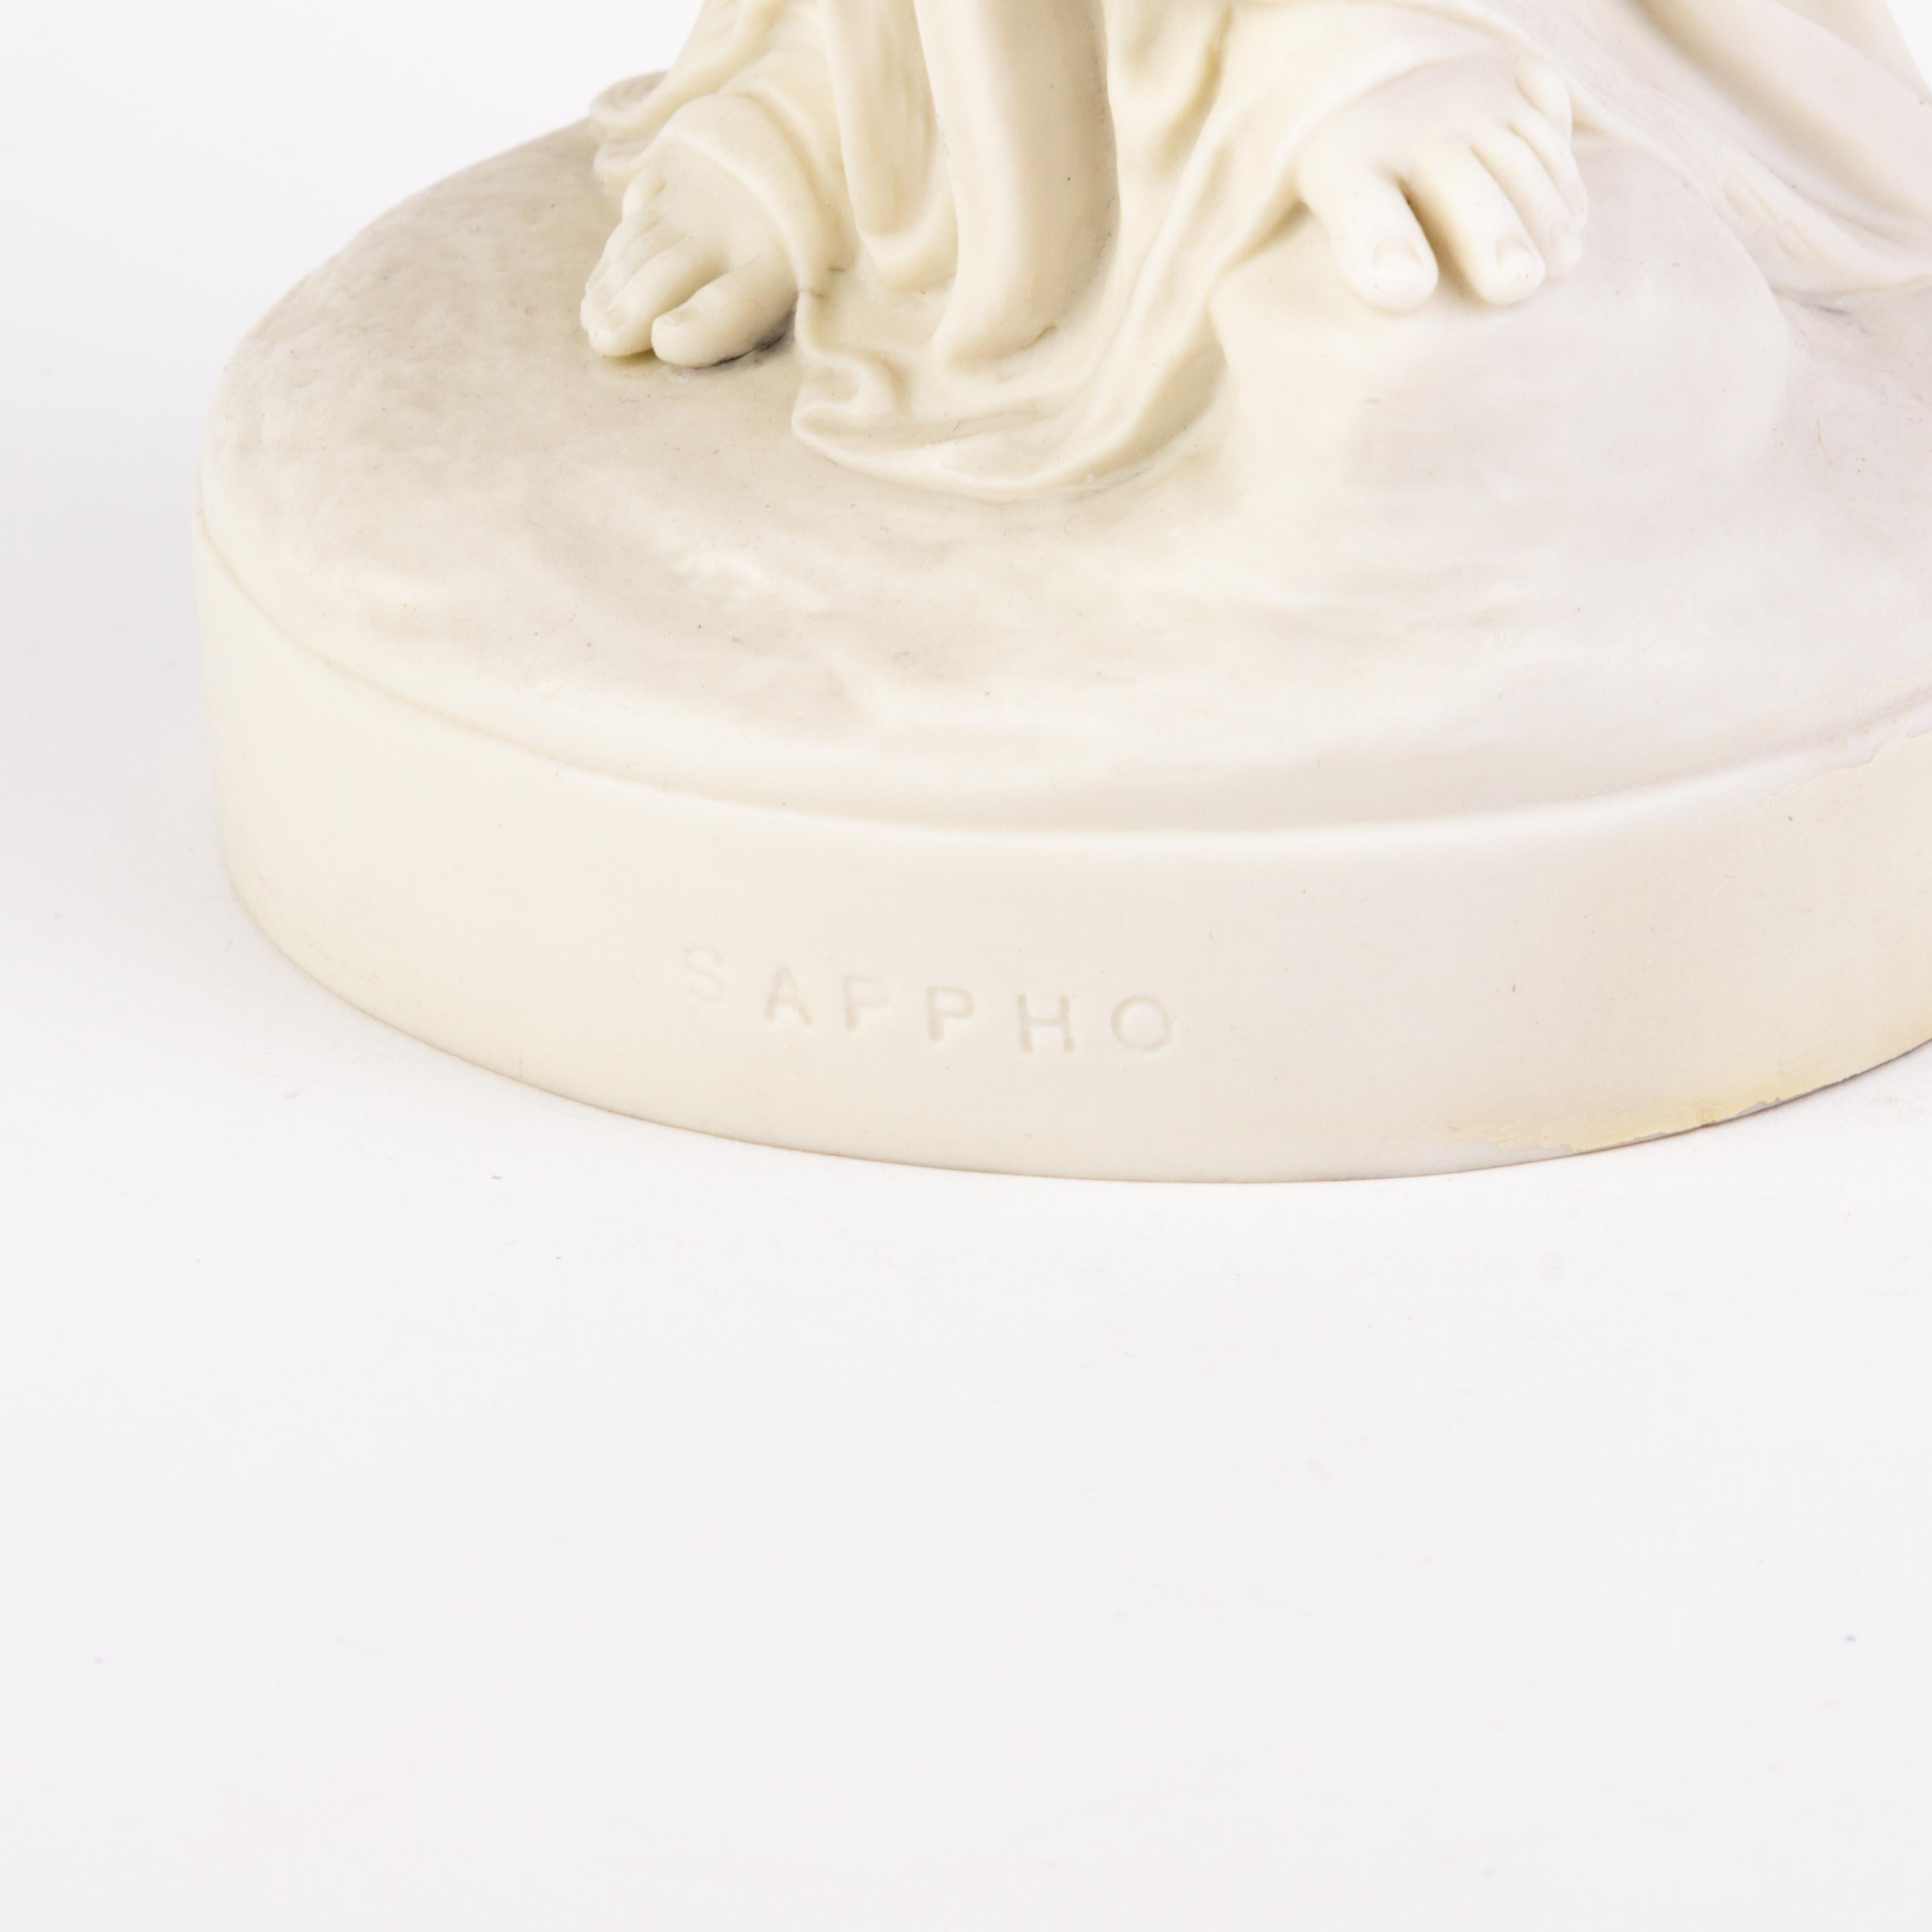 English Victorian Copeland Parian Ware Statue of Sappho the Poet 19th Century
Good condition
From a private collection.
Free international shipping.